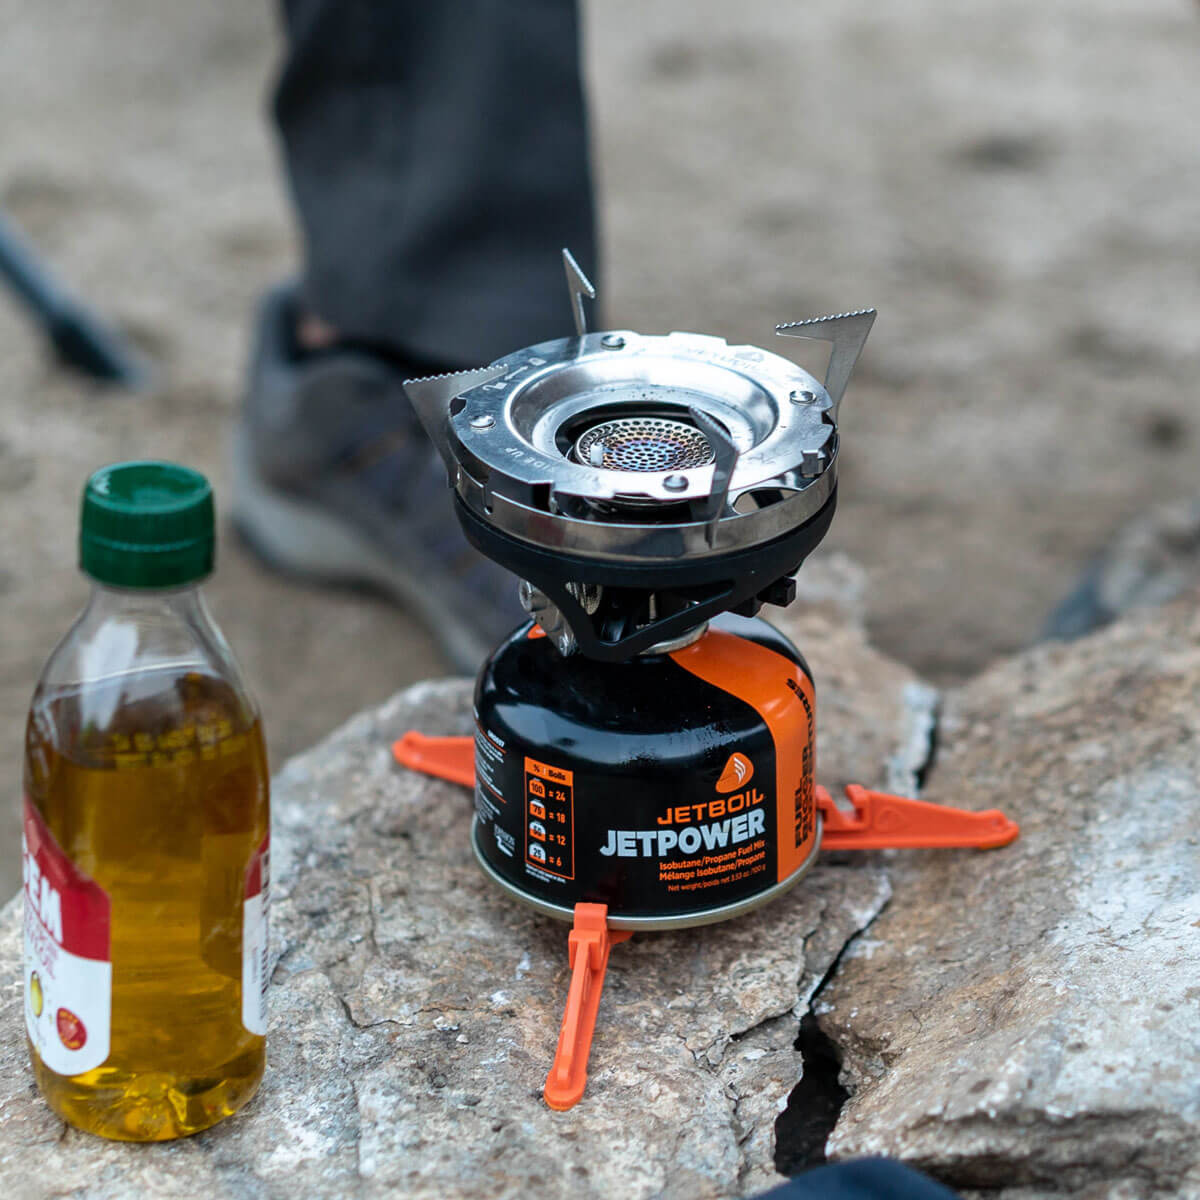 JetBoil Support - Aim Outdoors